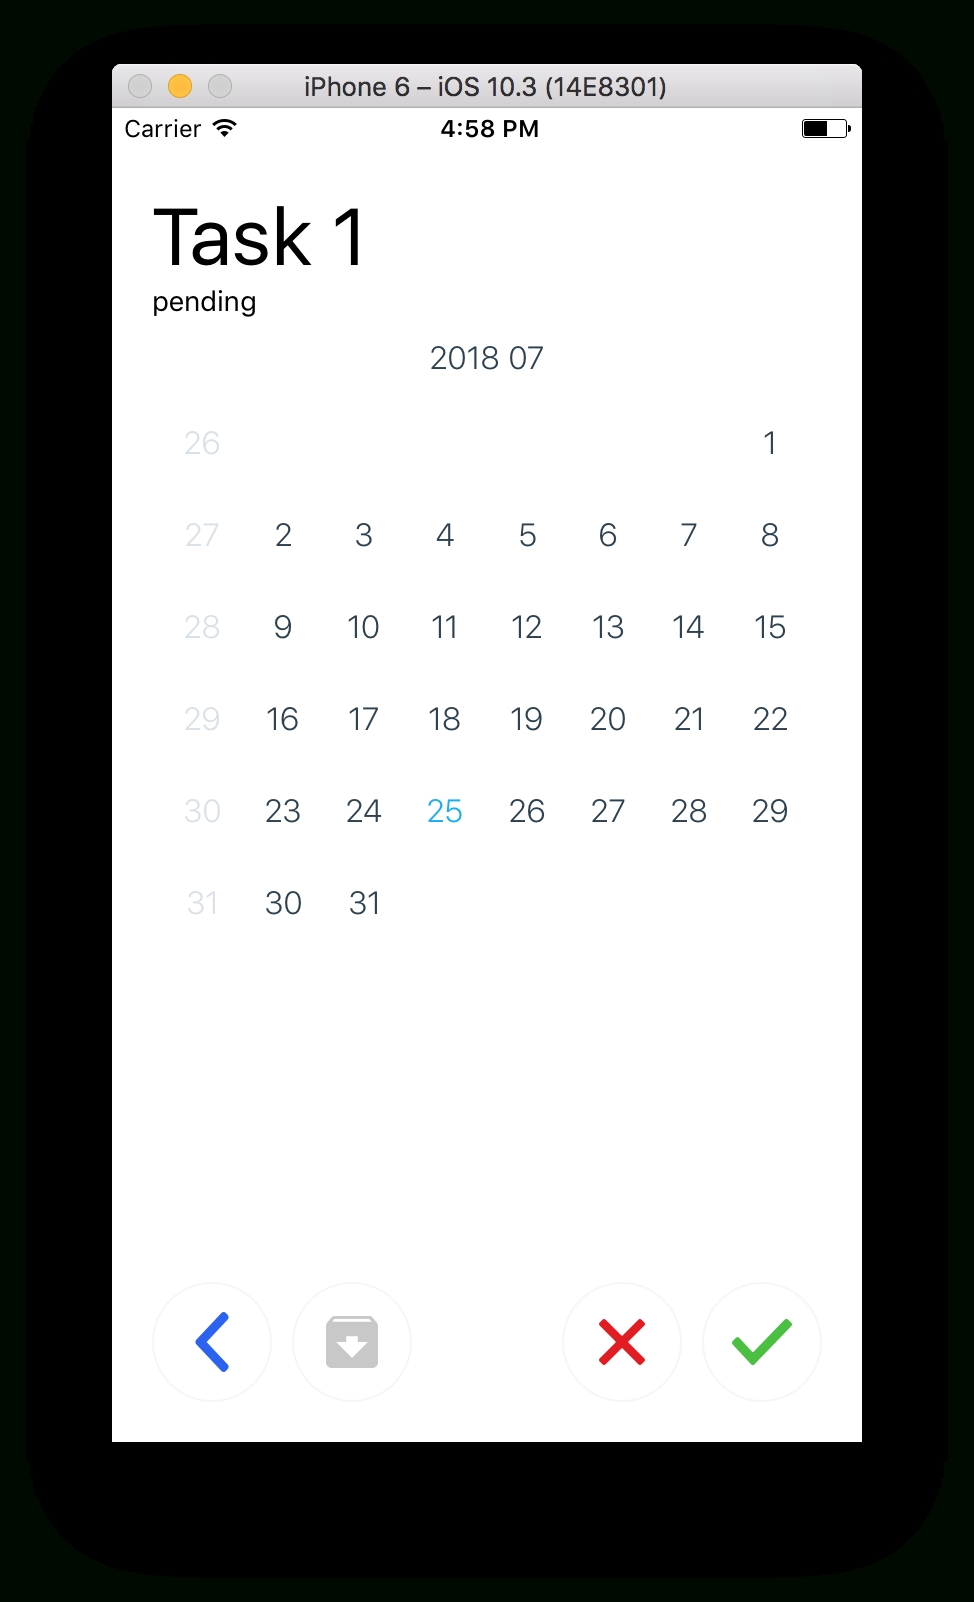 Calendar Shows Some Extra Days When Hideextradays Is True